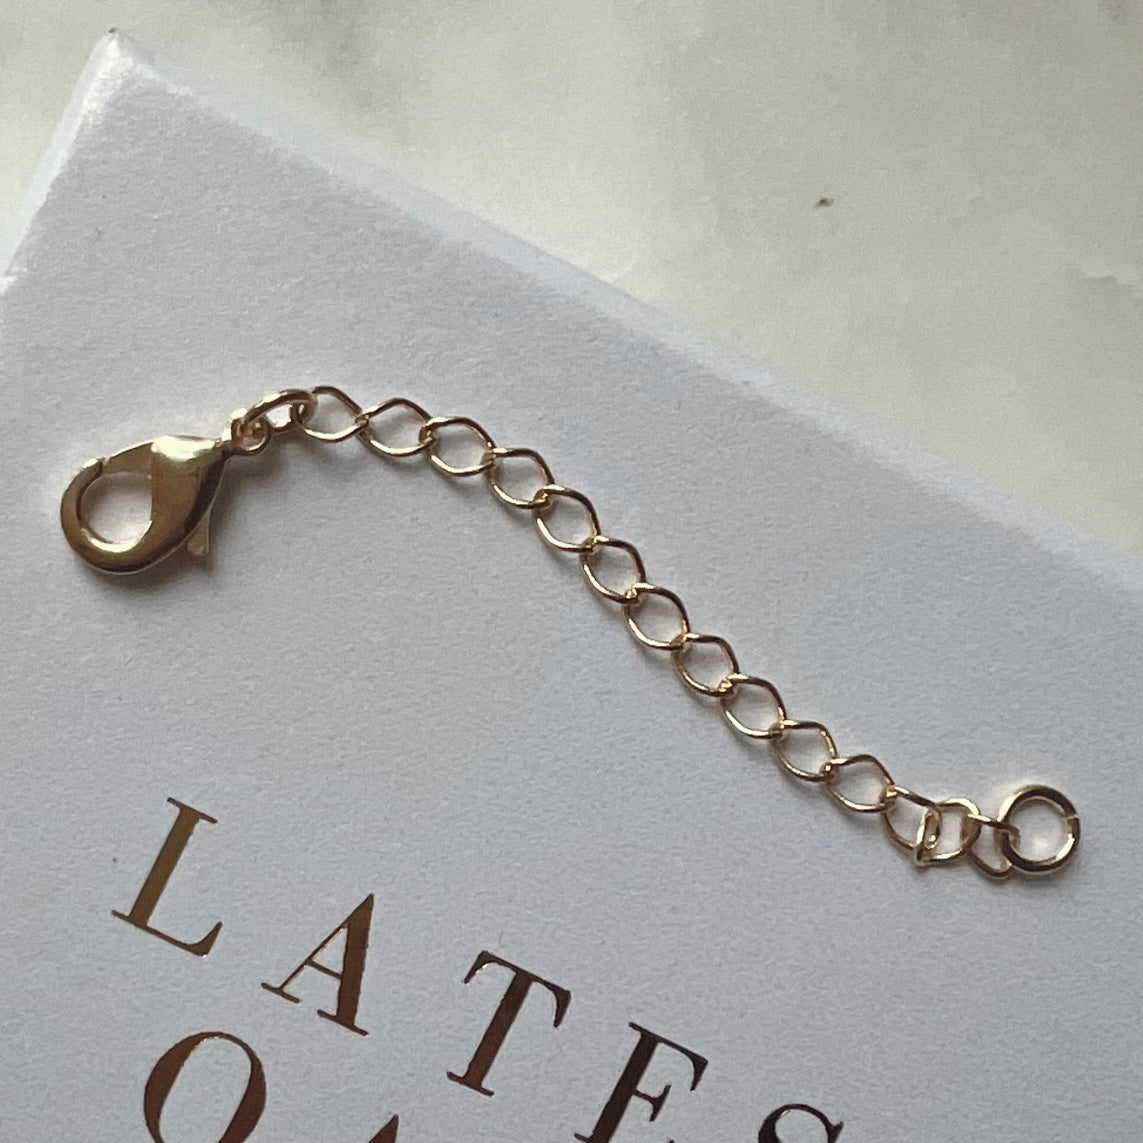 Otis B Jewelry. INTERCHANGEABLE EXTENDER, two or three inch length extenders,  Sterling Silver or Gold Filled length extension clasp